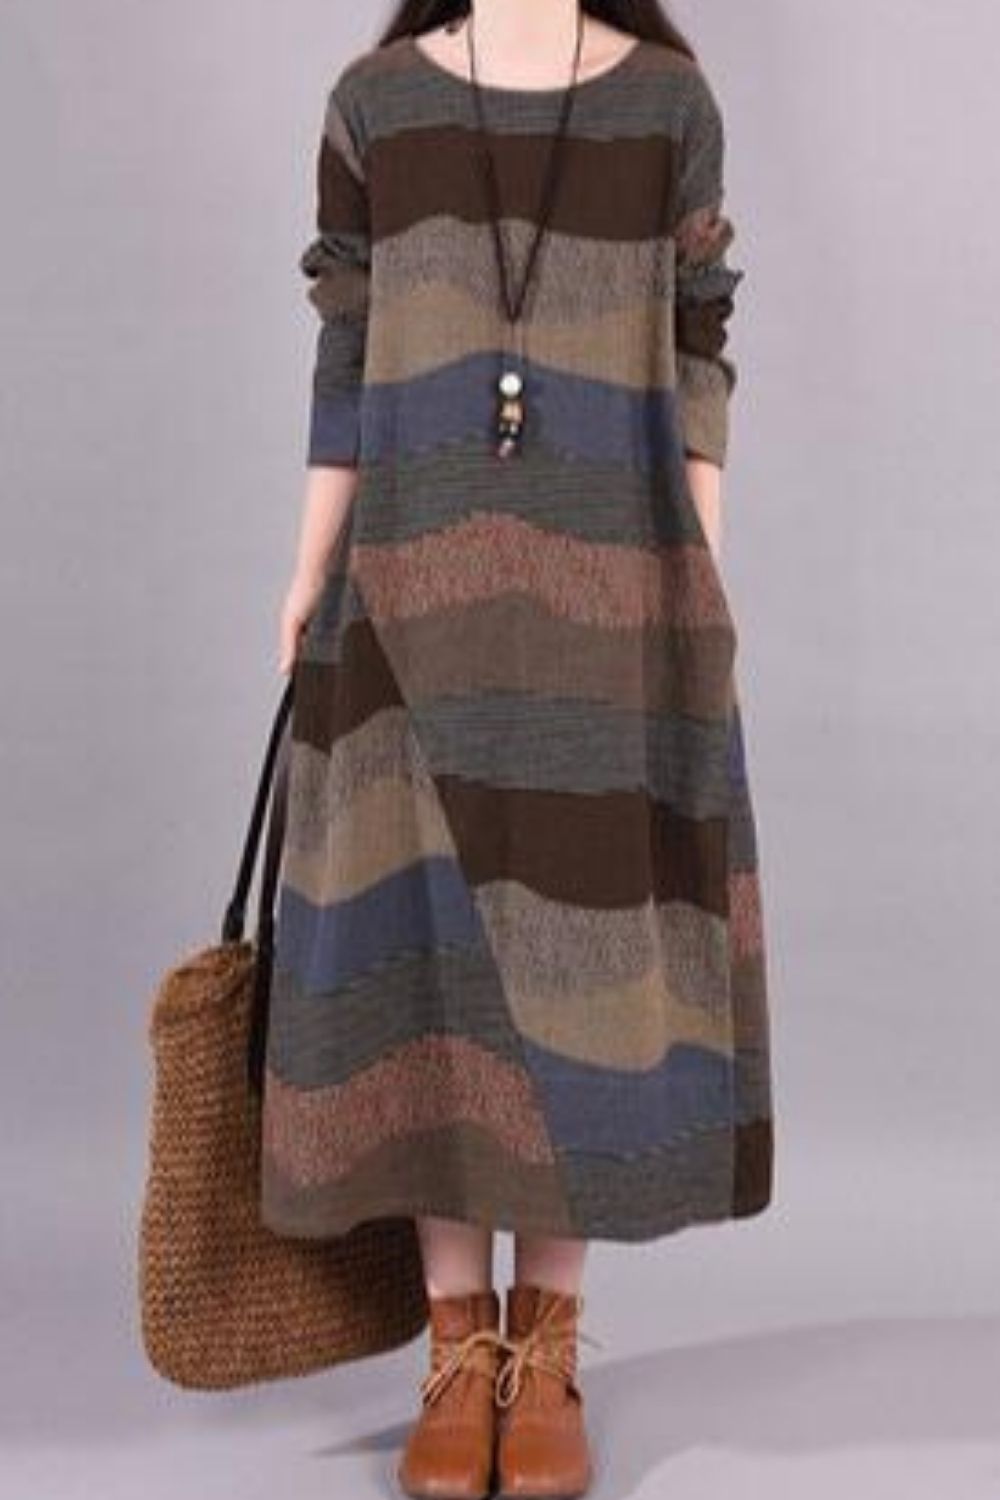 Long Sleeve Cotton Linen Vintage Print Spring Autumn O-Neck Dresses For Women Casual Loose Office Lady Dress Elegant Clothes